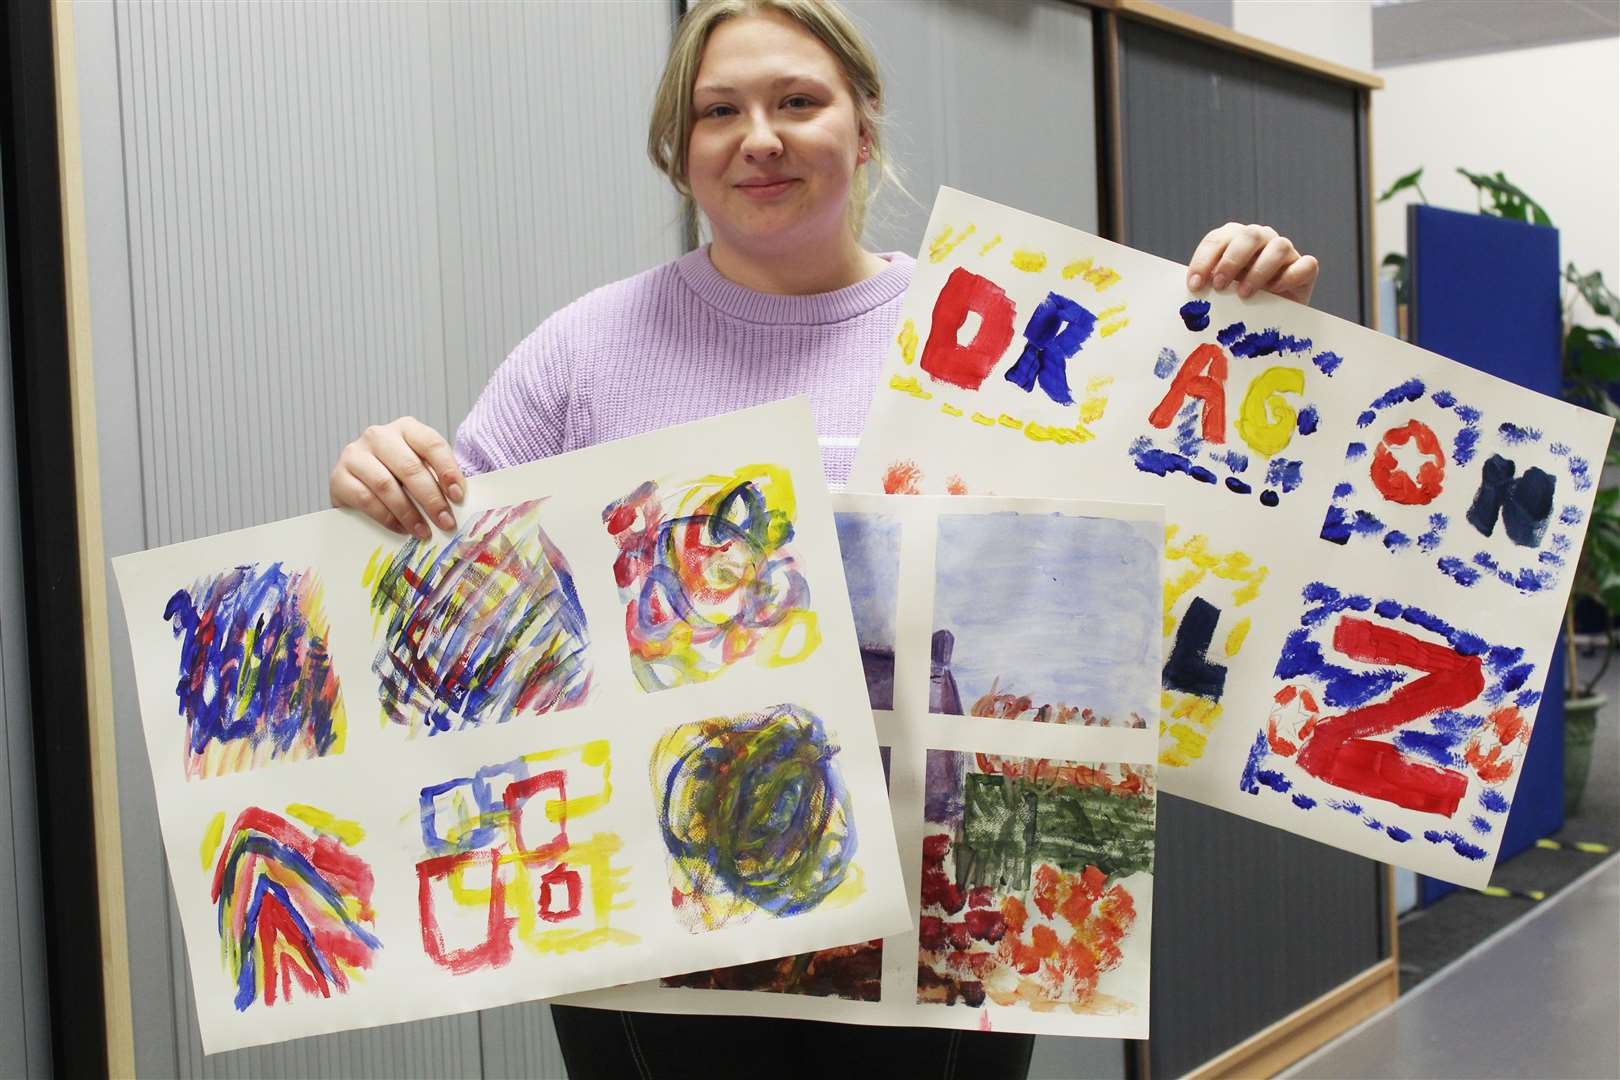 Tutor Millie Farmer shows off some of the art sketches produced by students at an acrylic session at GO, West High Street, Inverurie Picture: Griselda McGregor